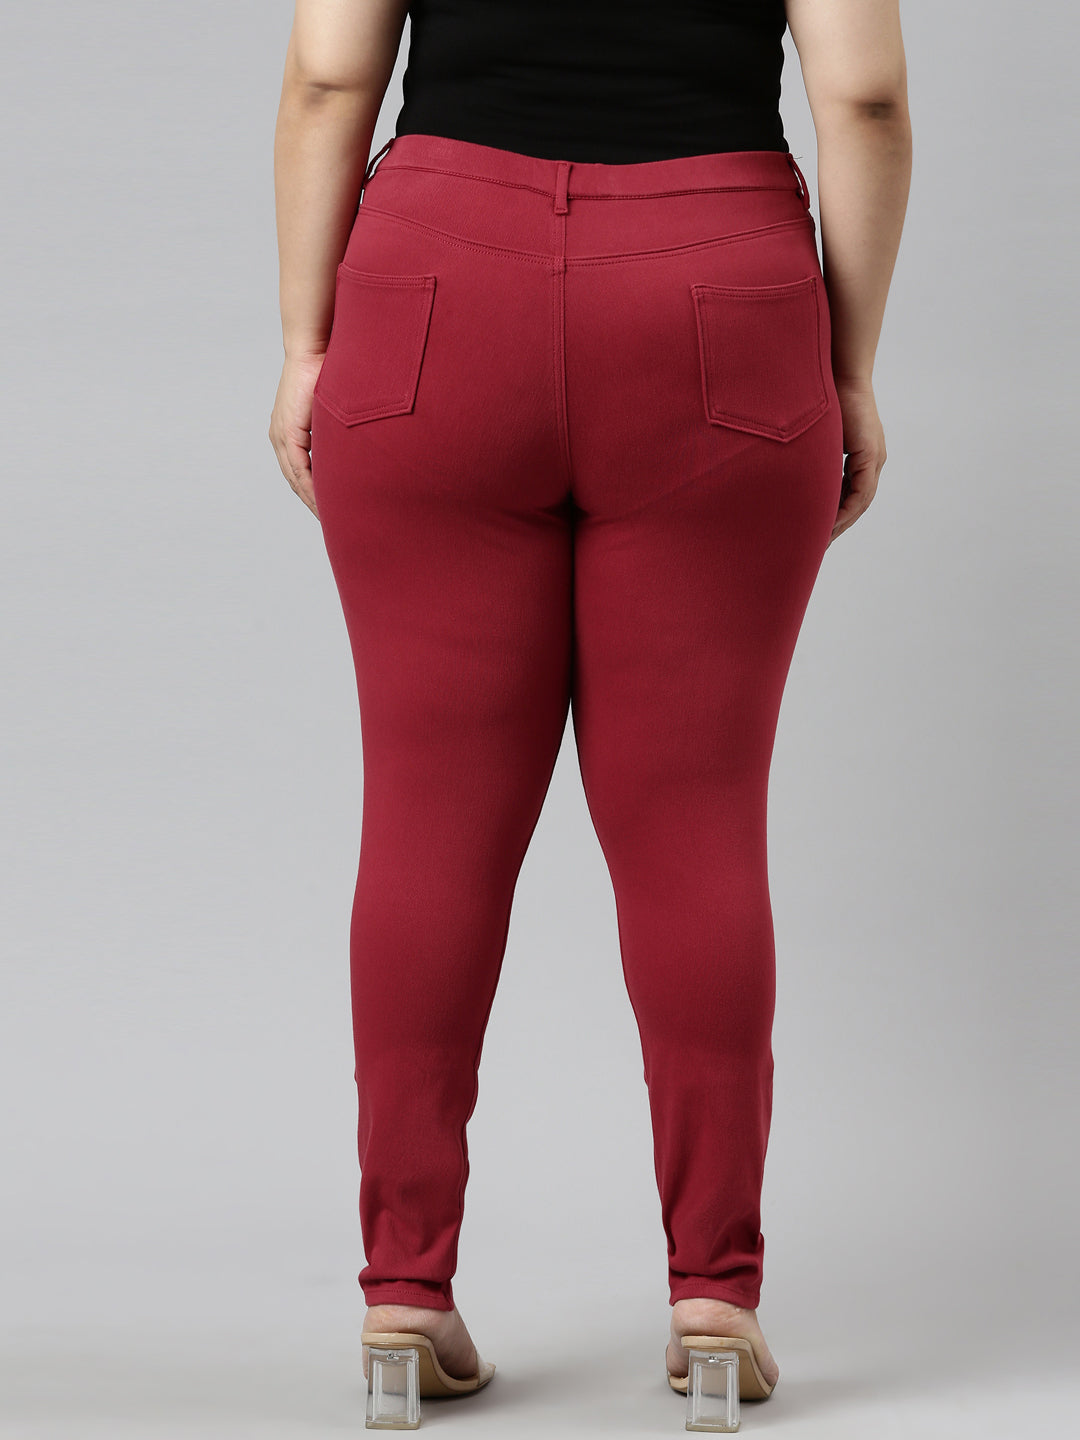 Buy Women's Solid Cherry Super Stretch Jeggings Online